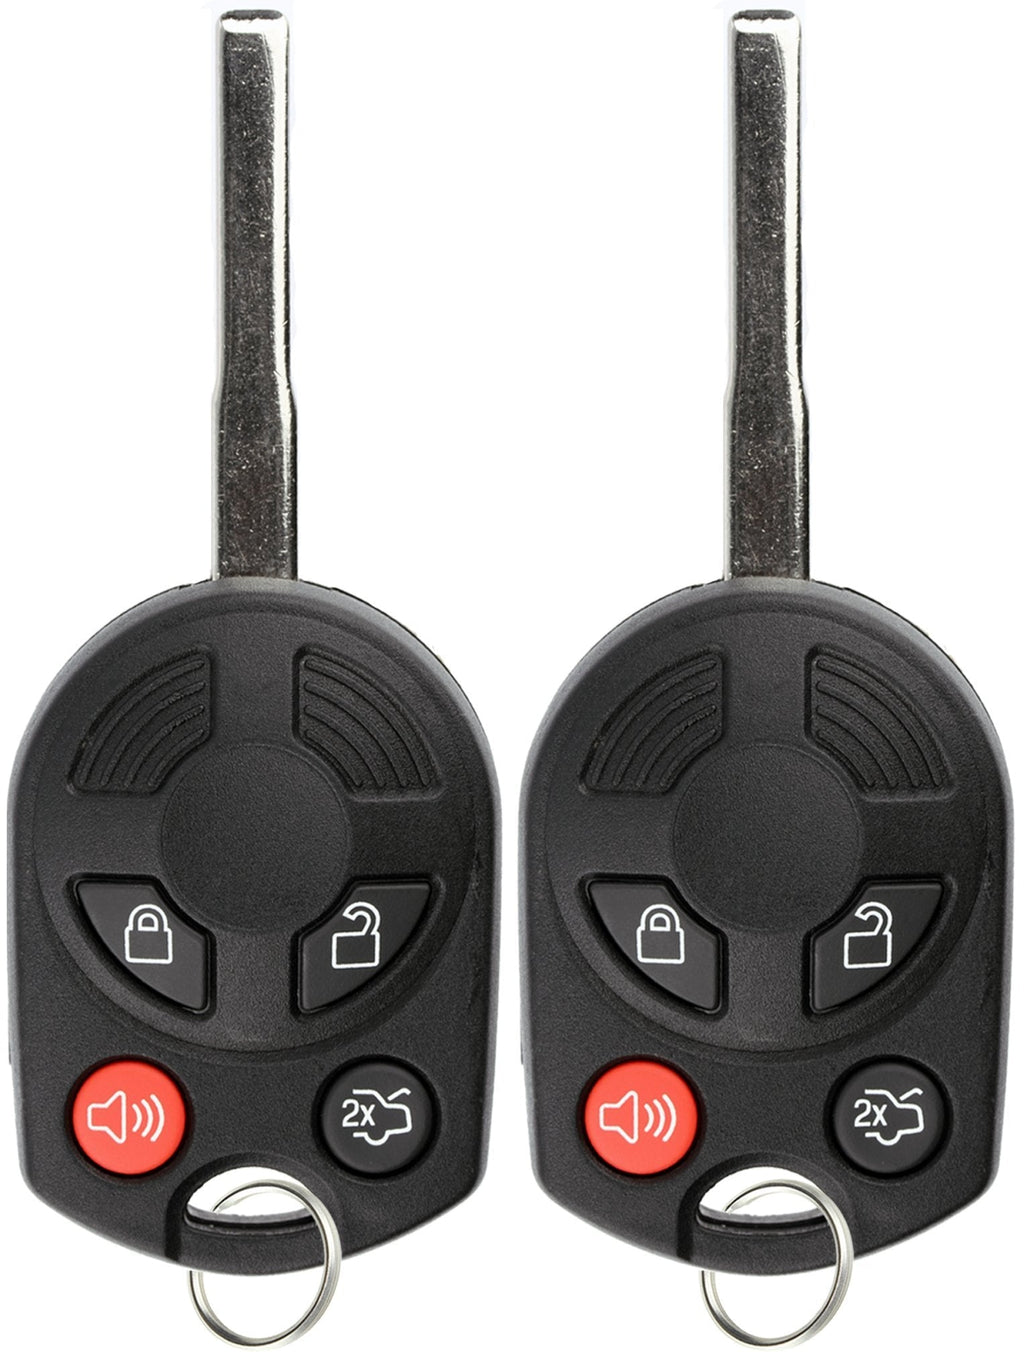  [AUSTRALIA] - KeylessOption Keyless Entry Remote Car Uncut High Security Key Fob for 164-R8007 Ford Focus Transit Connect Escape (Pack of 2)